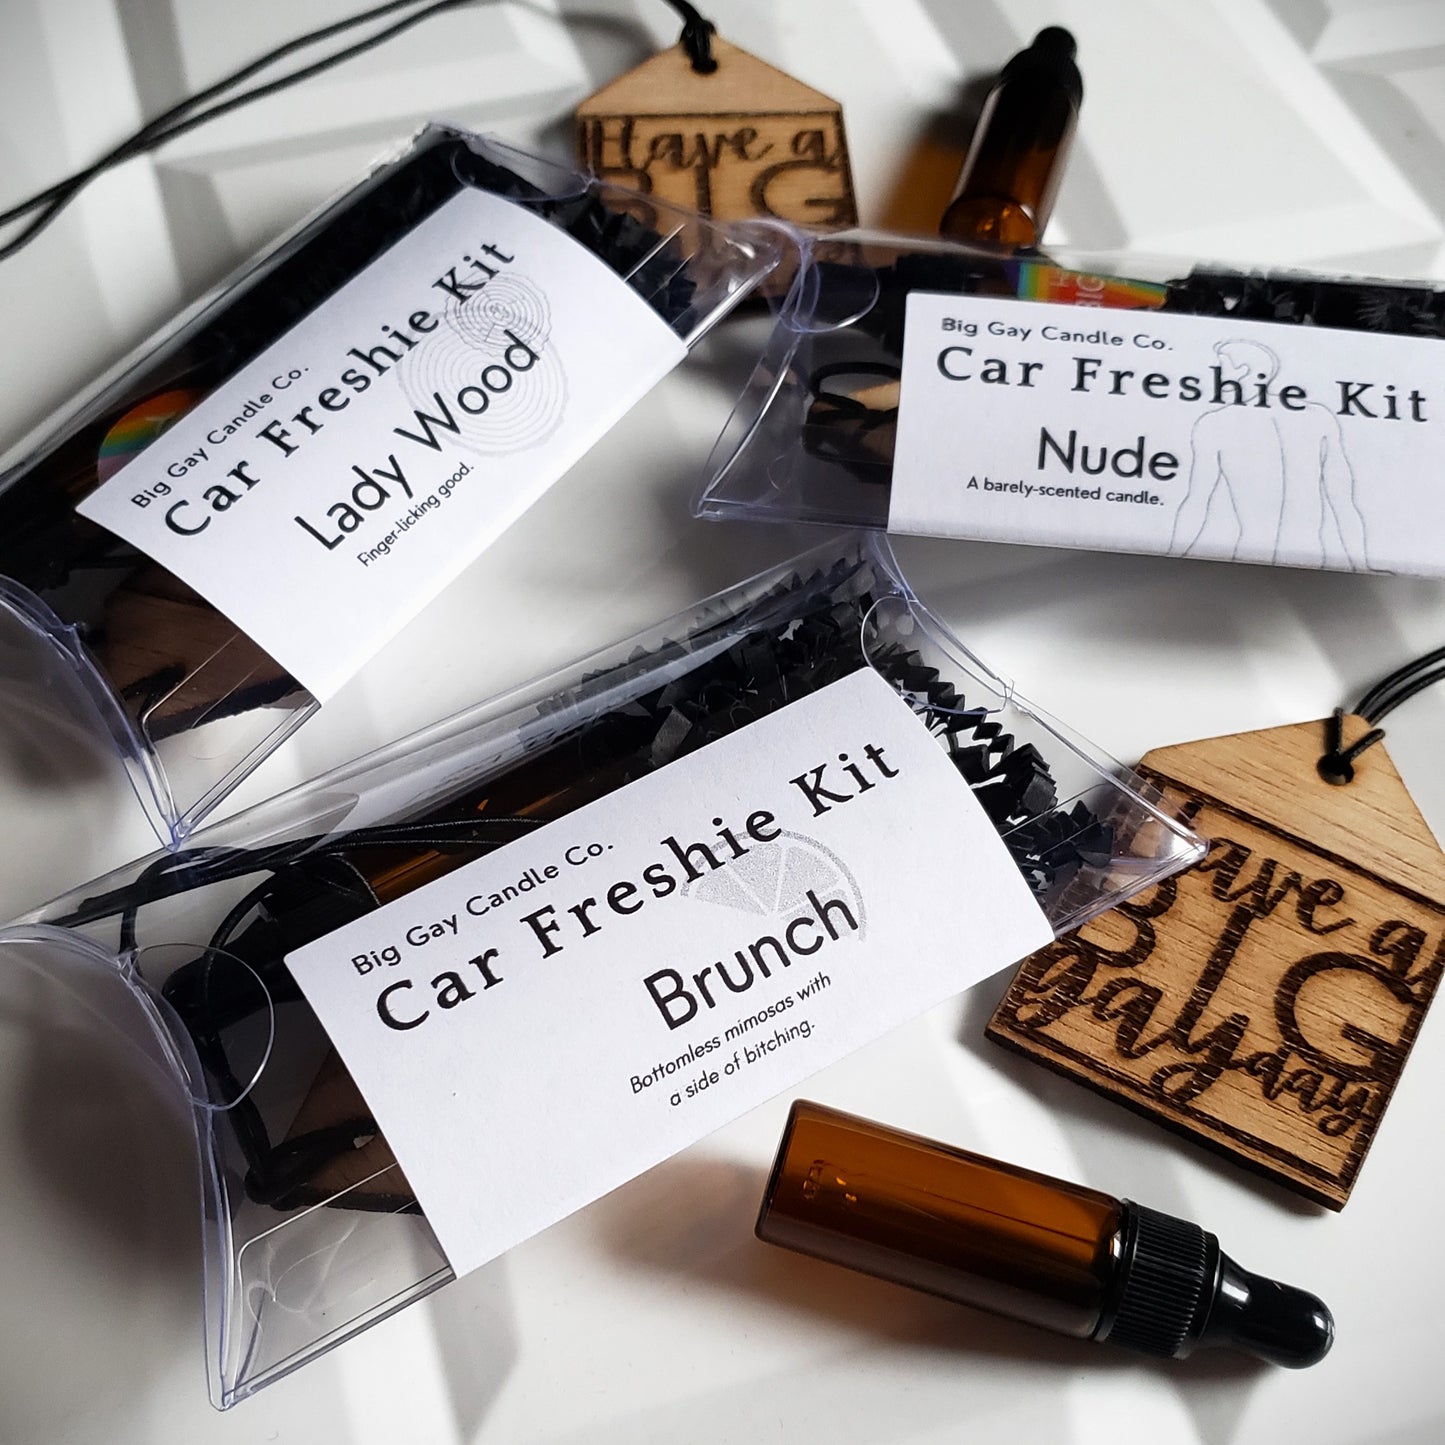 Overhead picture of a white tile background with wood, house-shaped car freshies that say Have a Big Gay Day, amber-colored glass vials of oil, and plastic pillow boxes with a black and white label with the names Lady Wood, Nude, and Brunch on top.